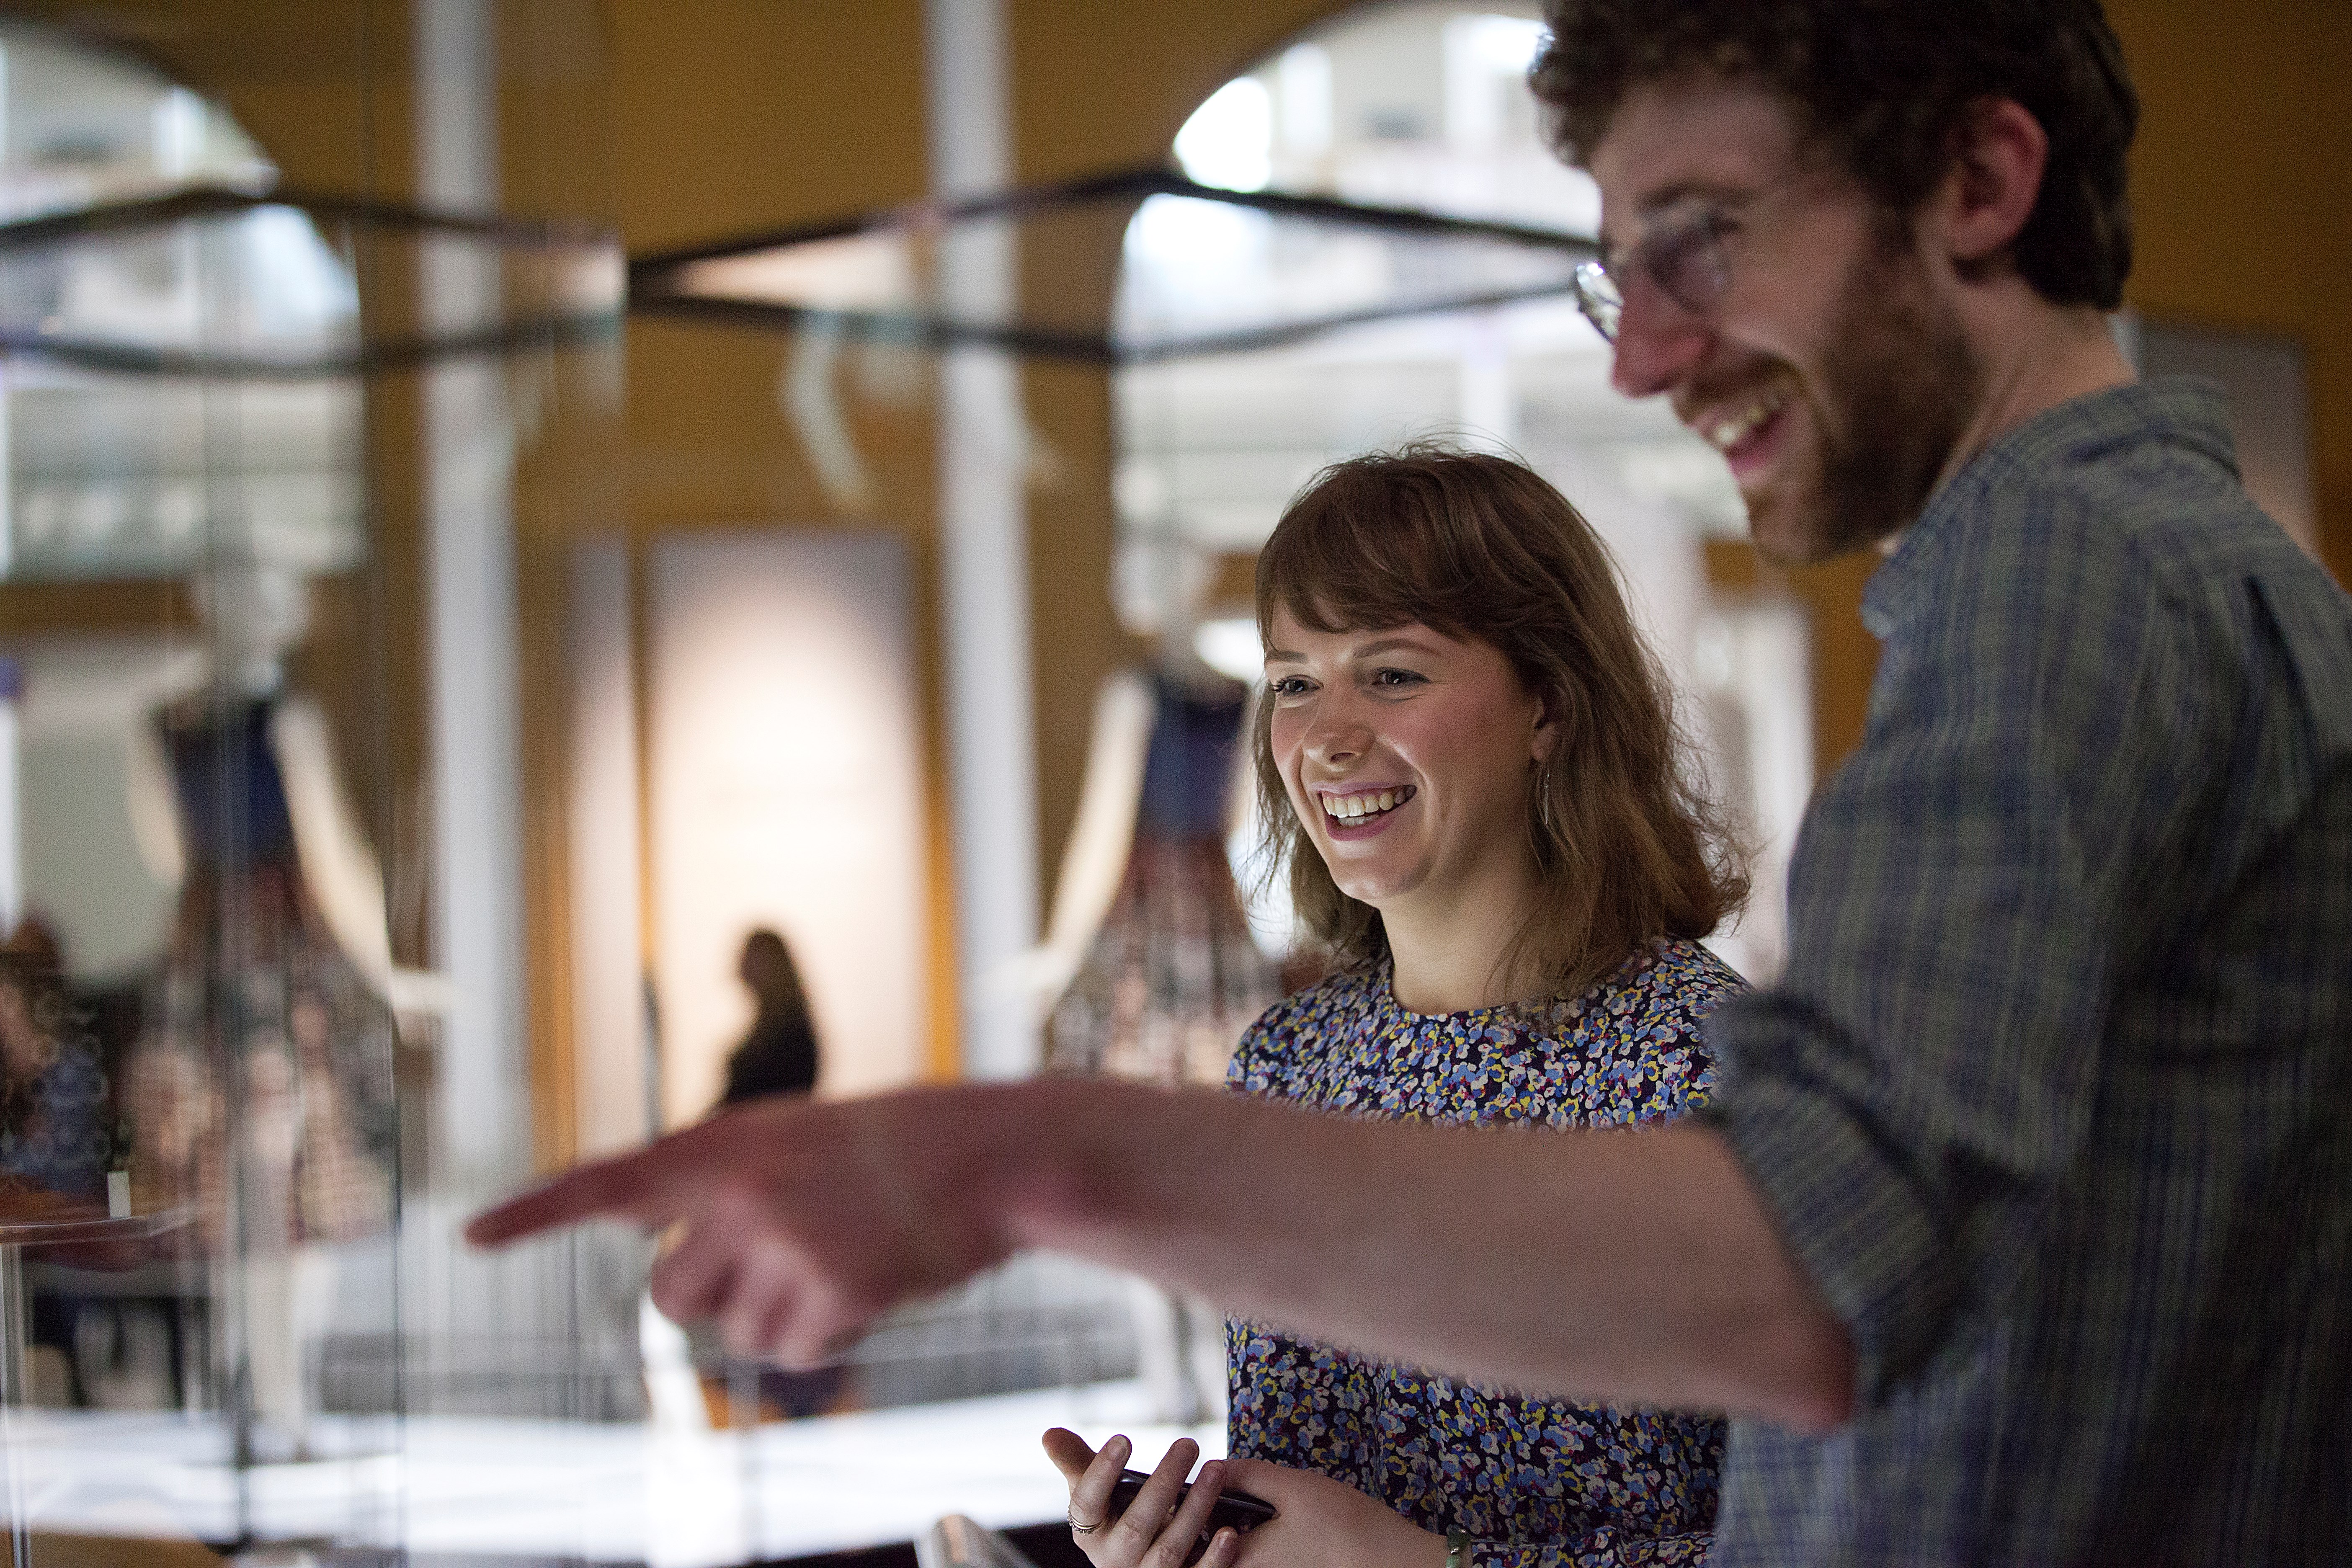 Woman and man smiling in a gallery with glass cases out of focus..